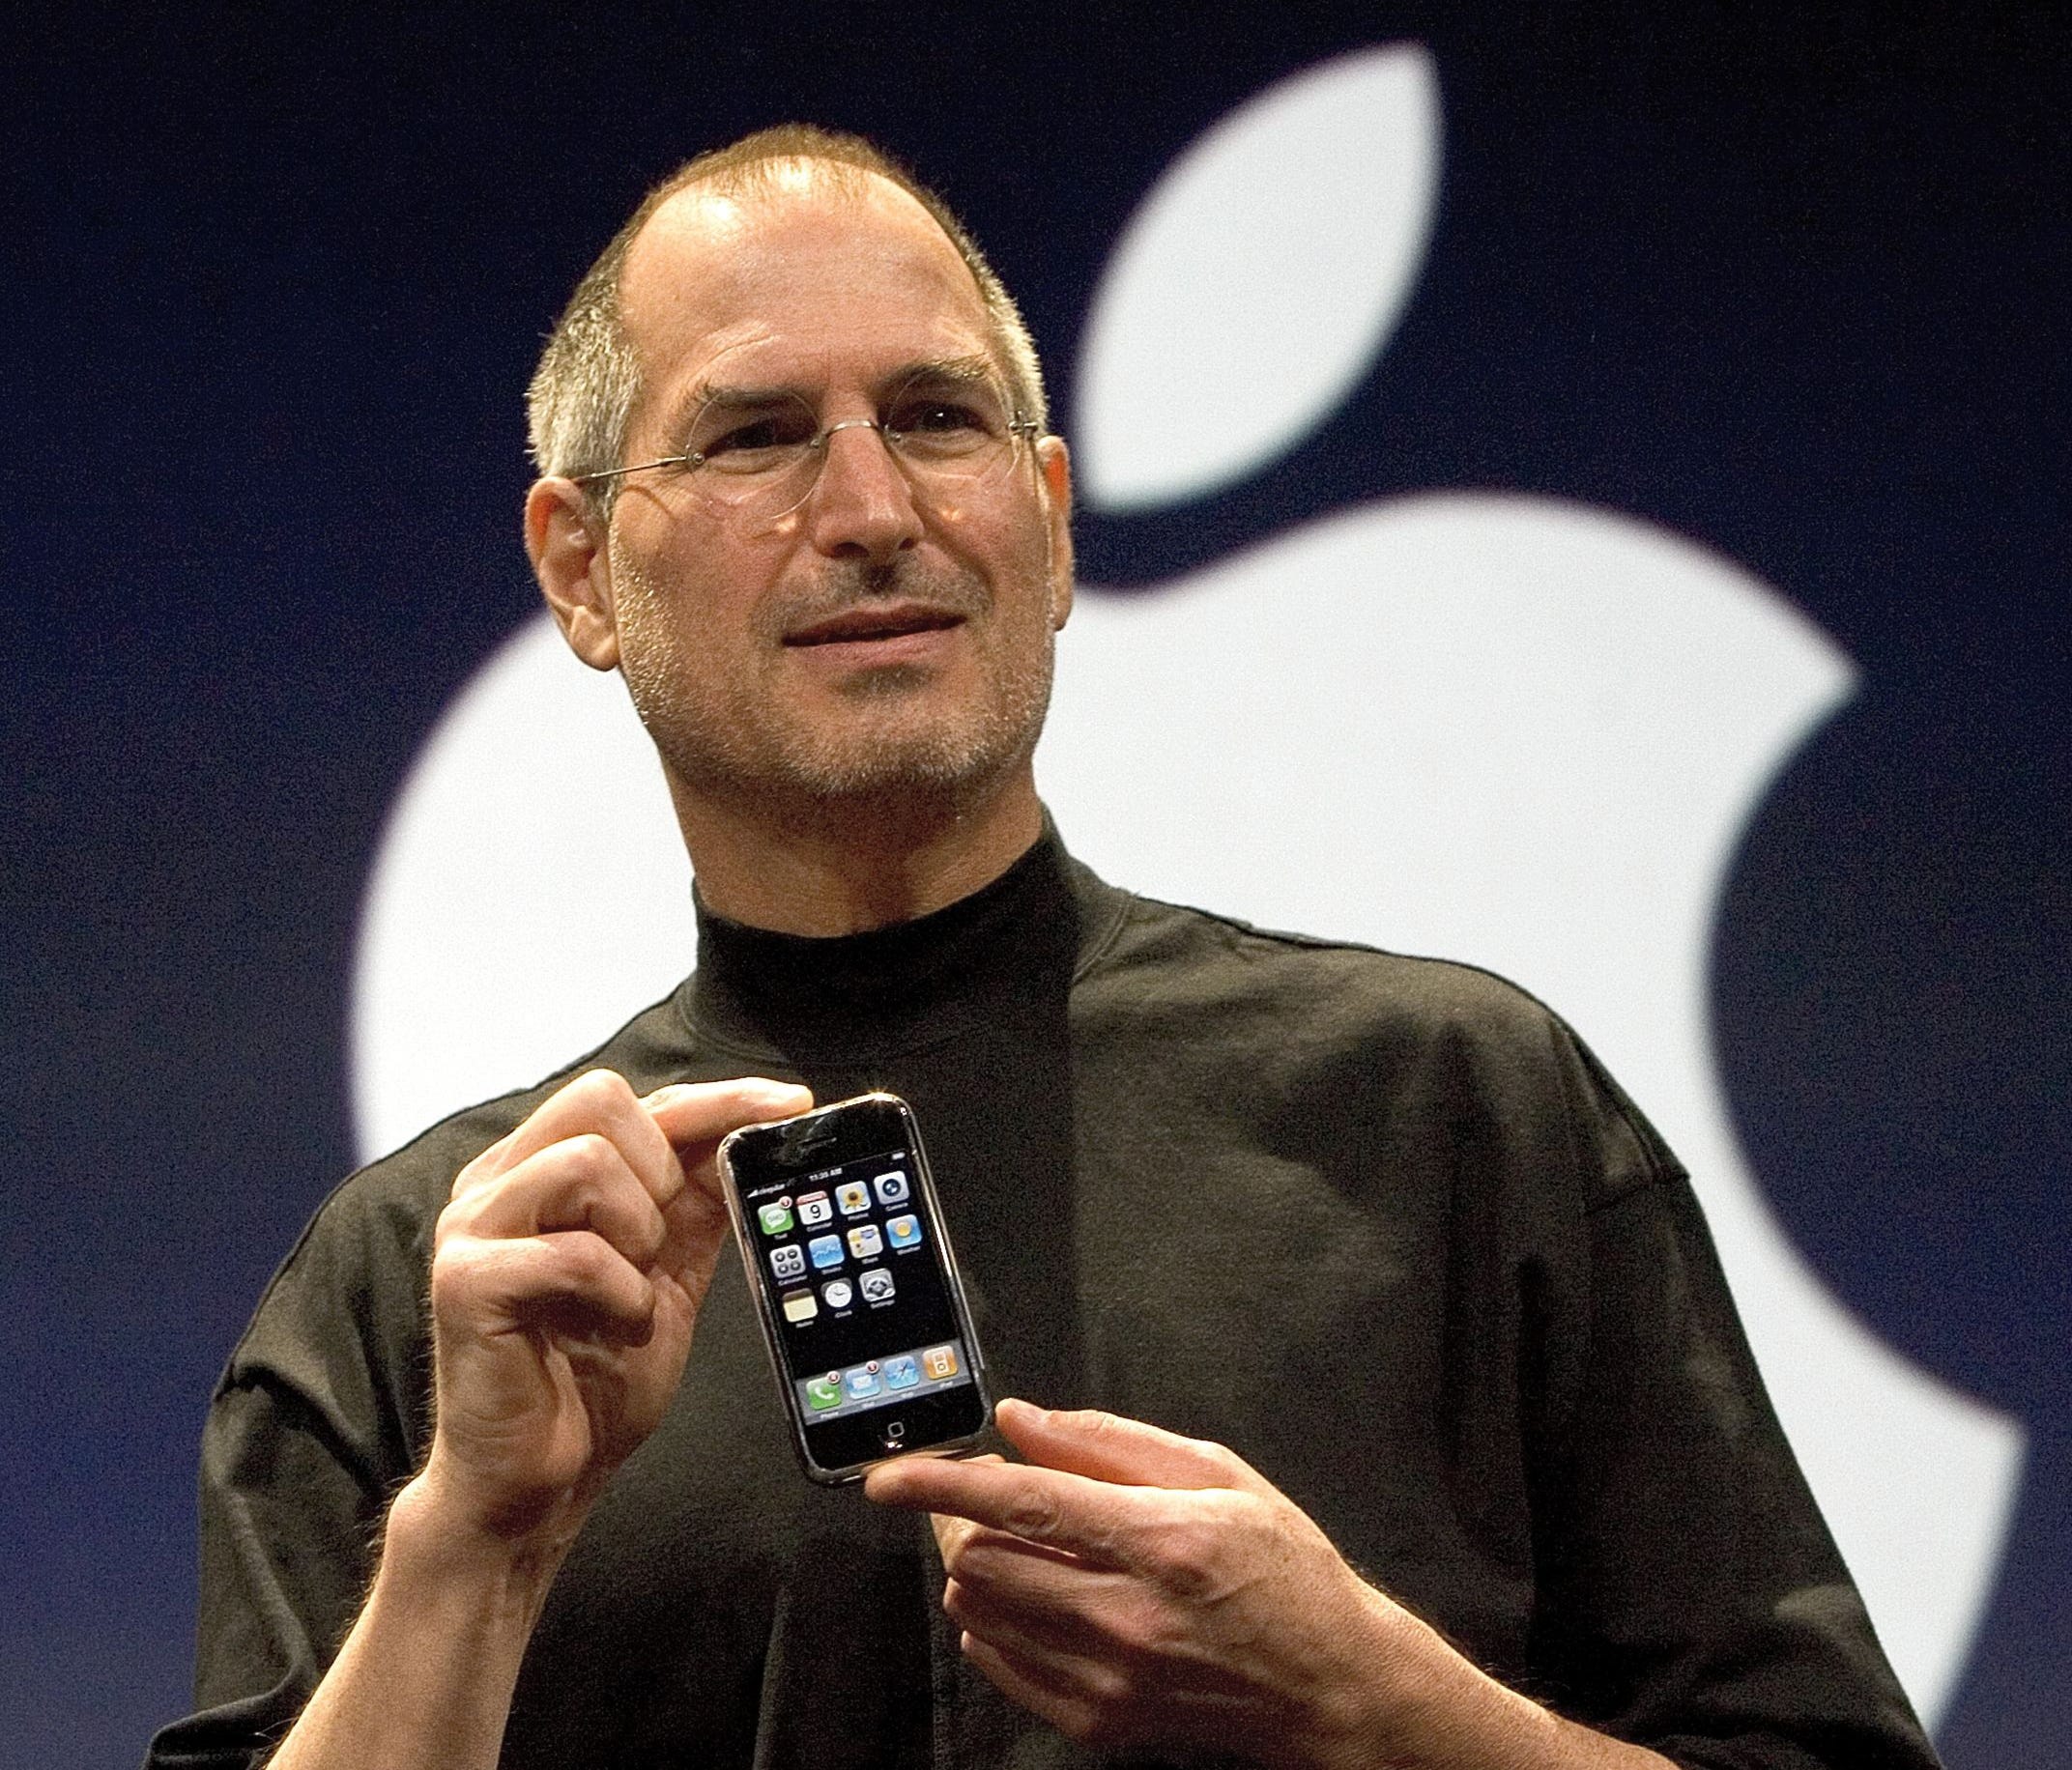 Steve Jobs at the iPhone launch in January 2007.